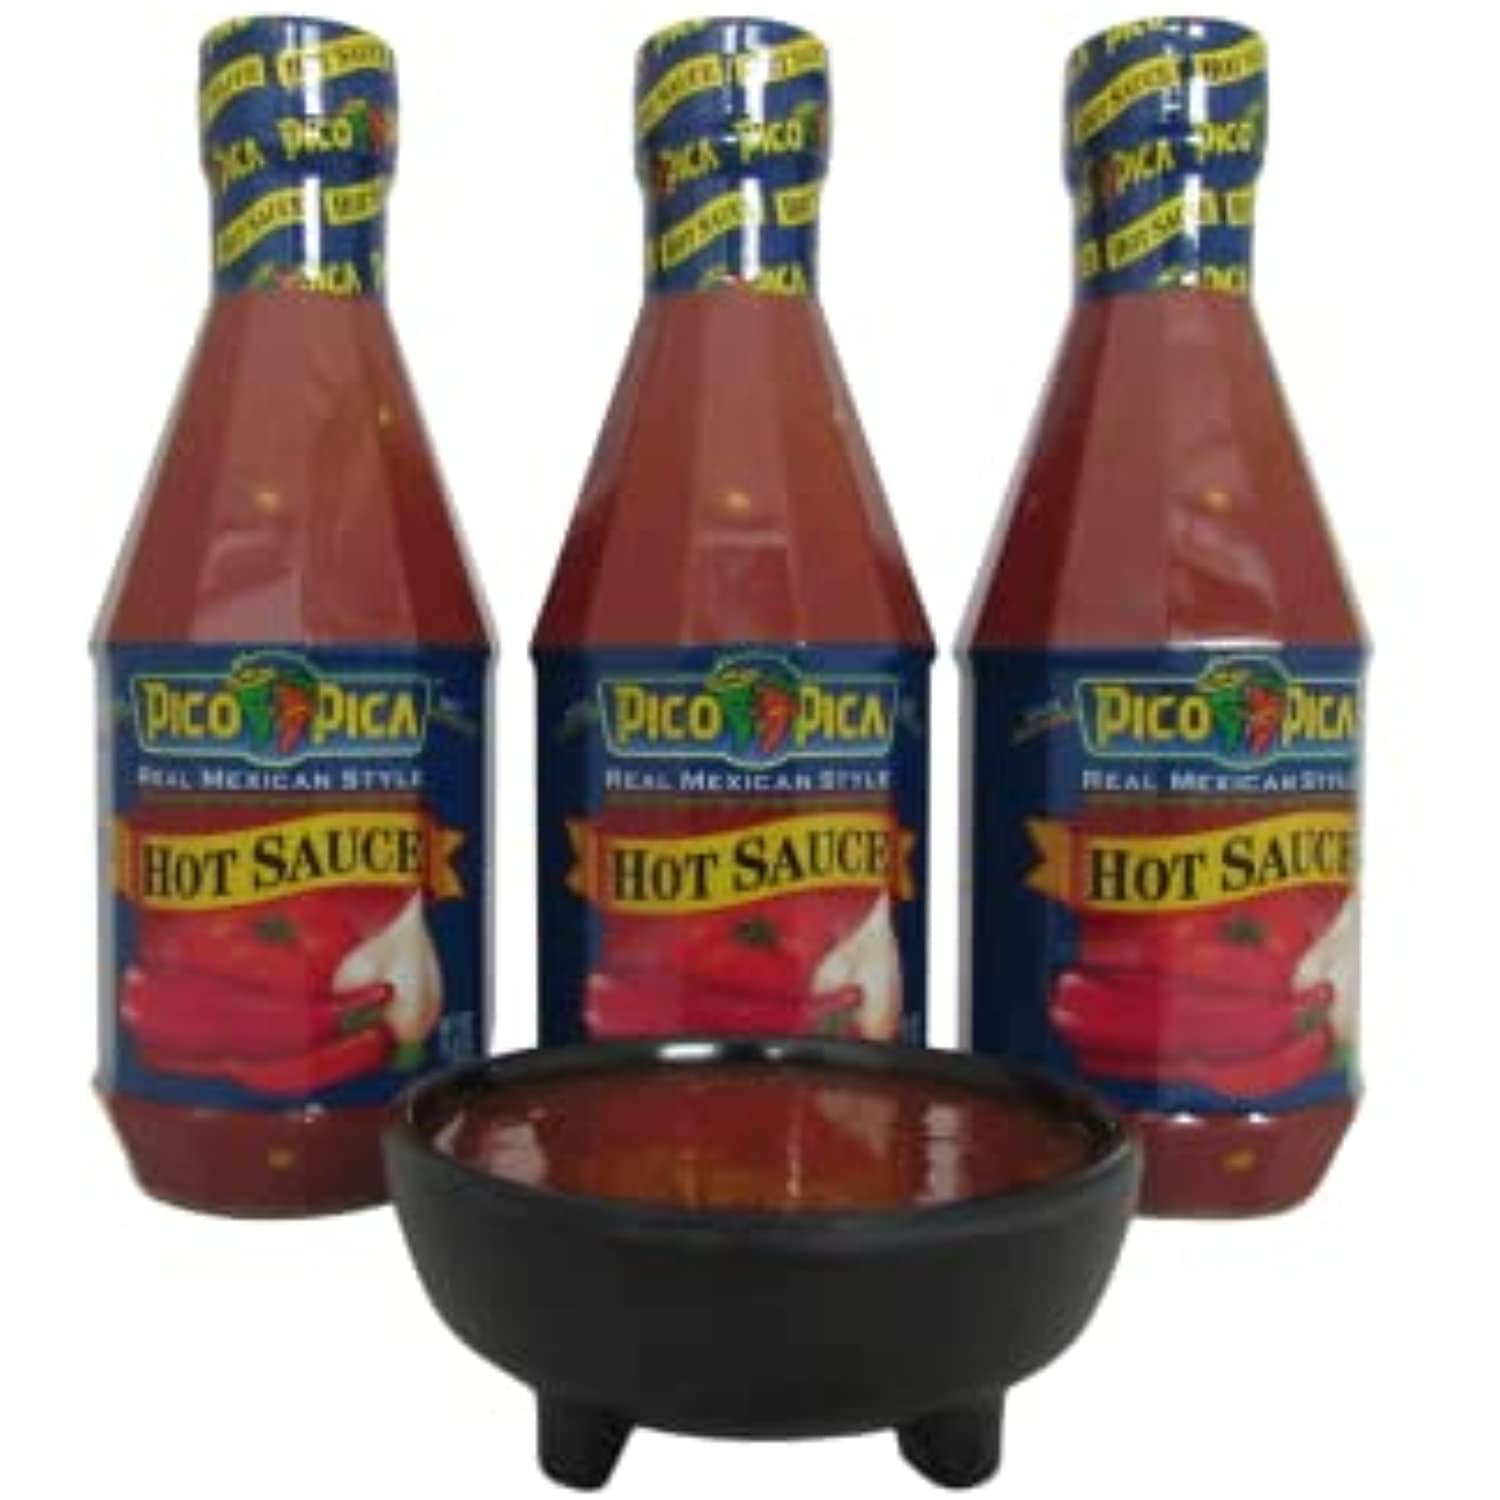 Pico Pica Real Mexican Style Hot Sauce, 15.5 Oz, Pack Of 3 Bundled